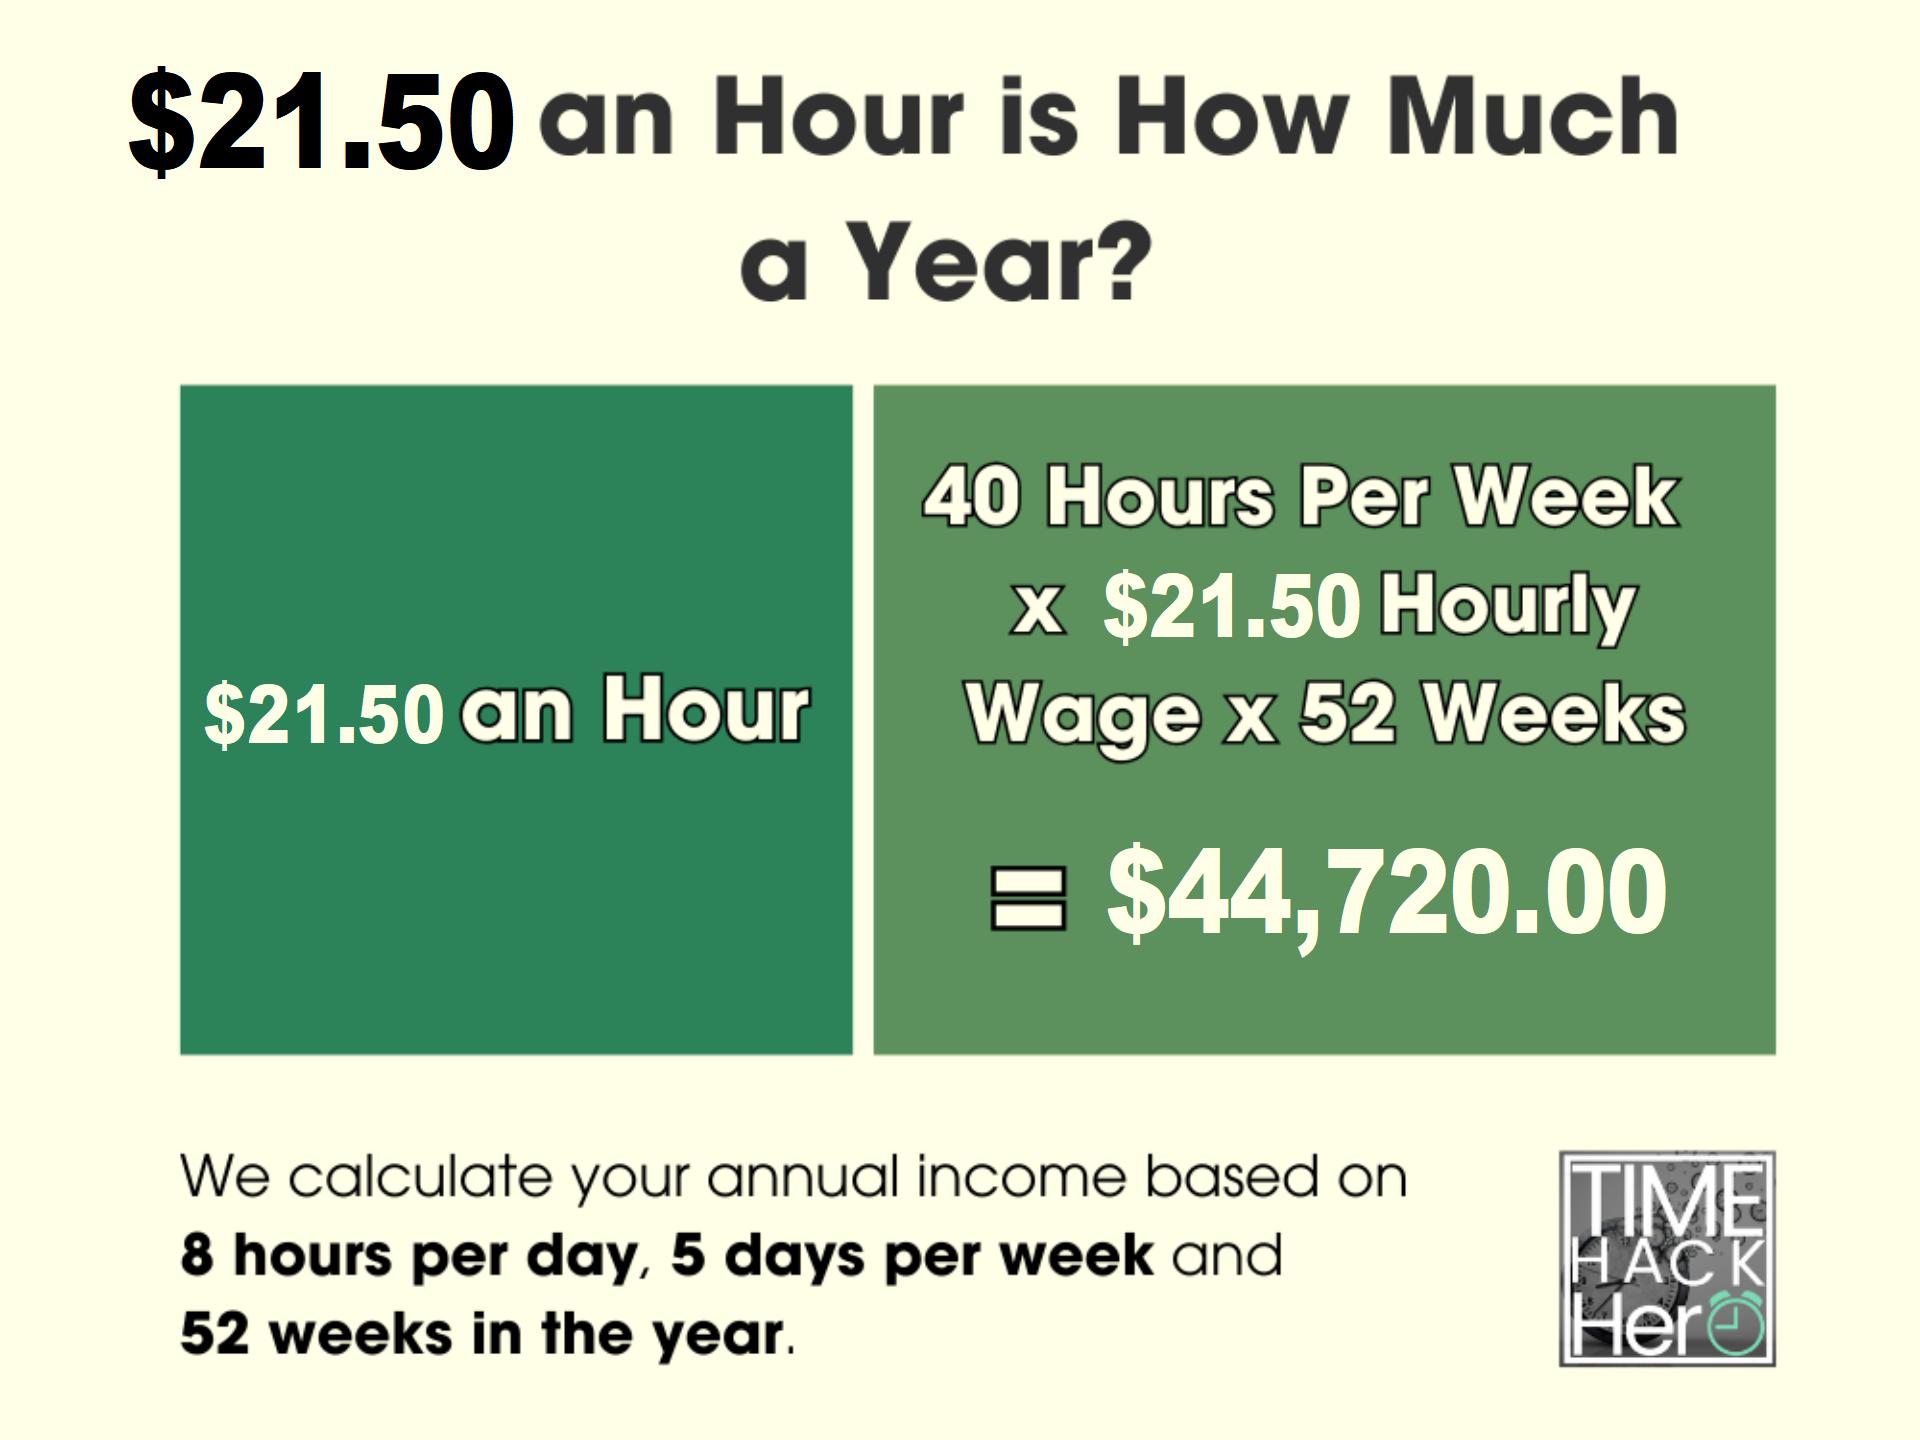 $21.50 an Hour is How Much a Year Before and After Taxes